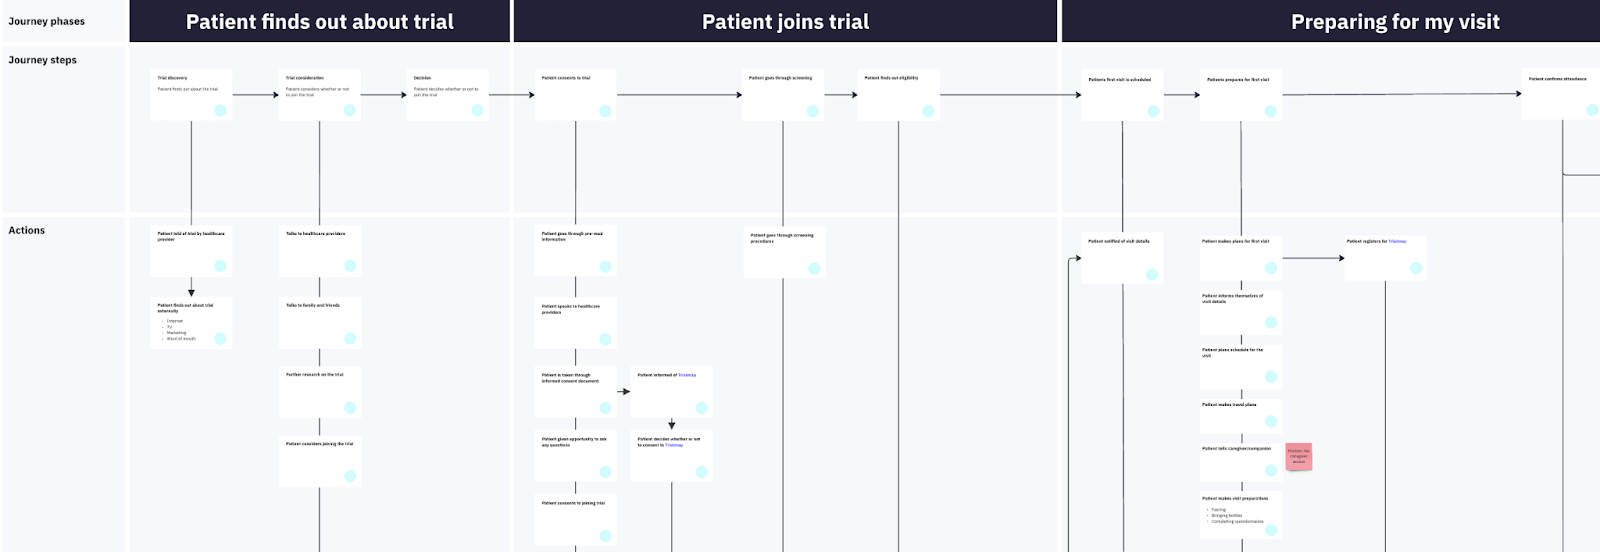 Our service blueprint mapping out the journey of a patient on trial